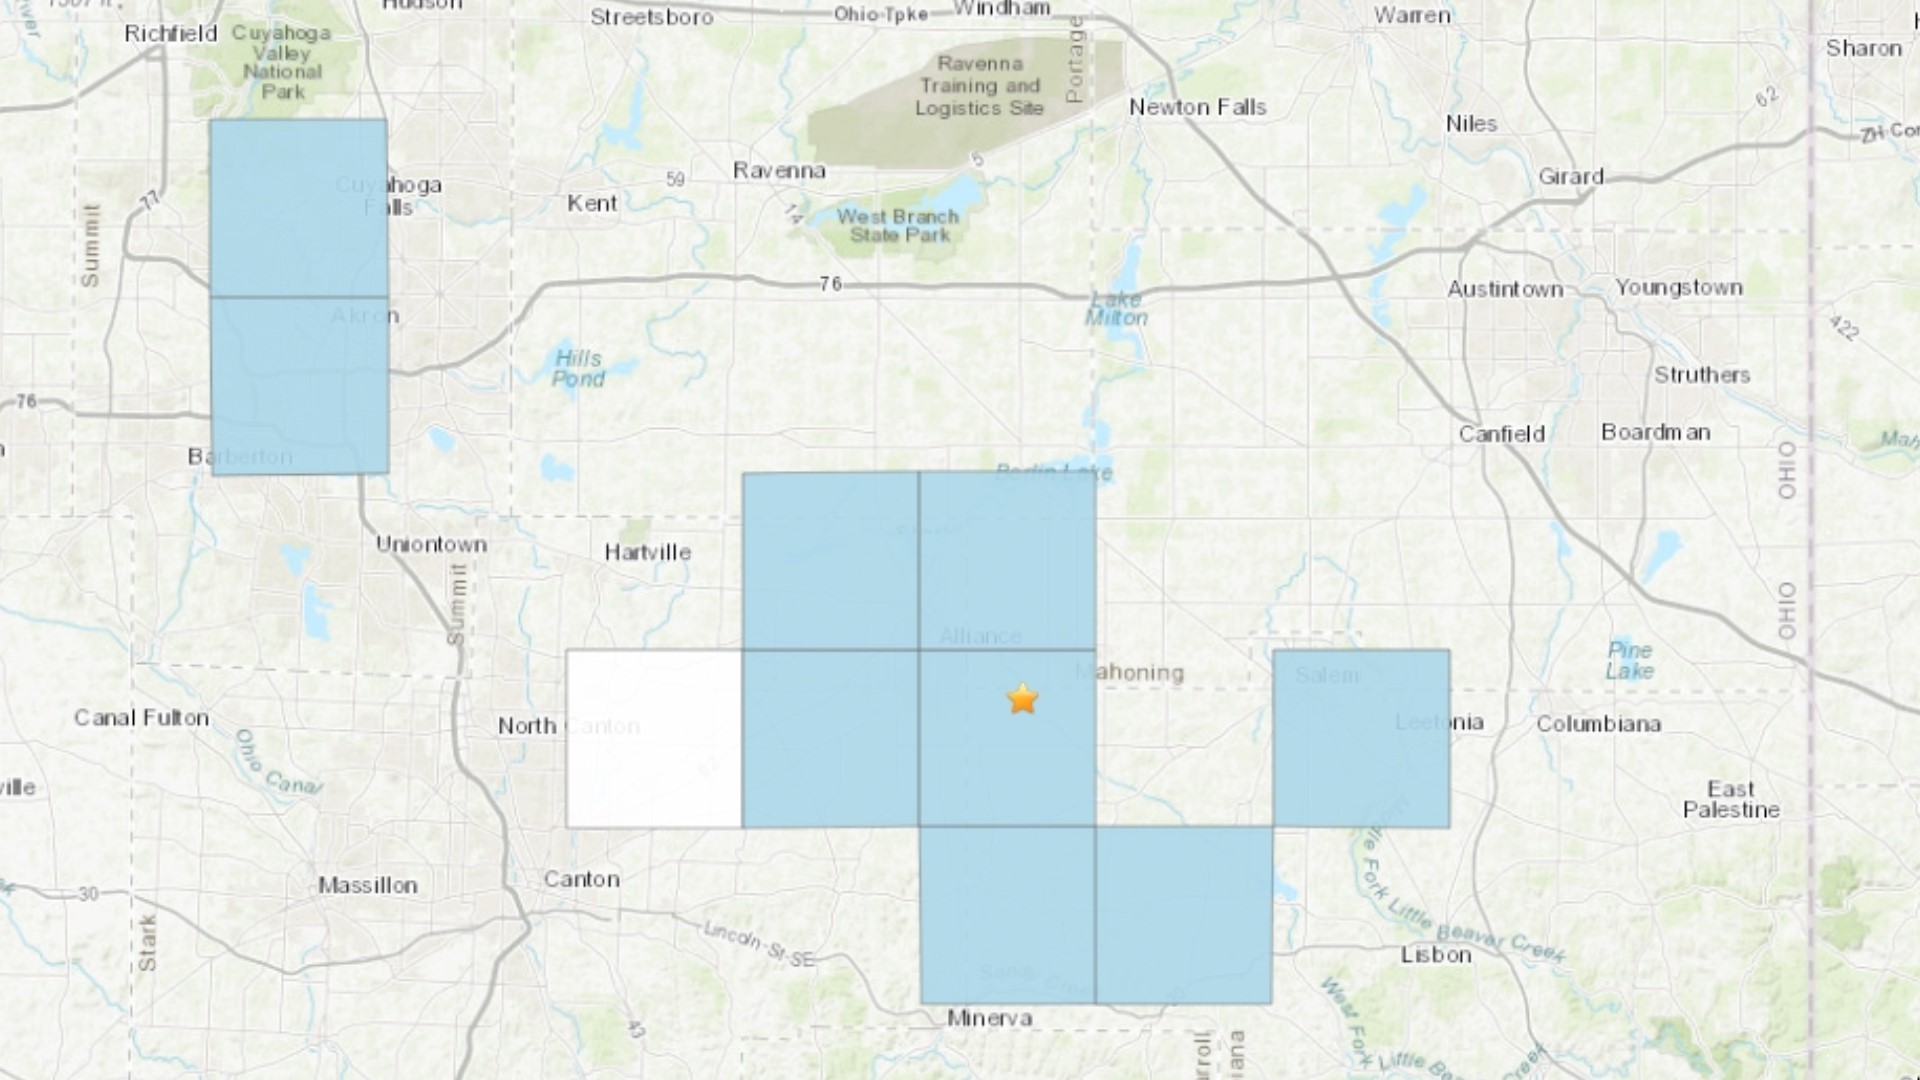 The earthquake happened in Mahoning County at 4:42 a.m. and community members reported feeling weak shakes in other nearby counties.